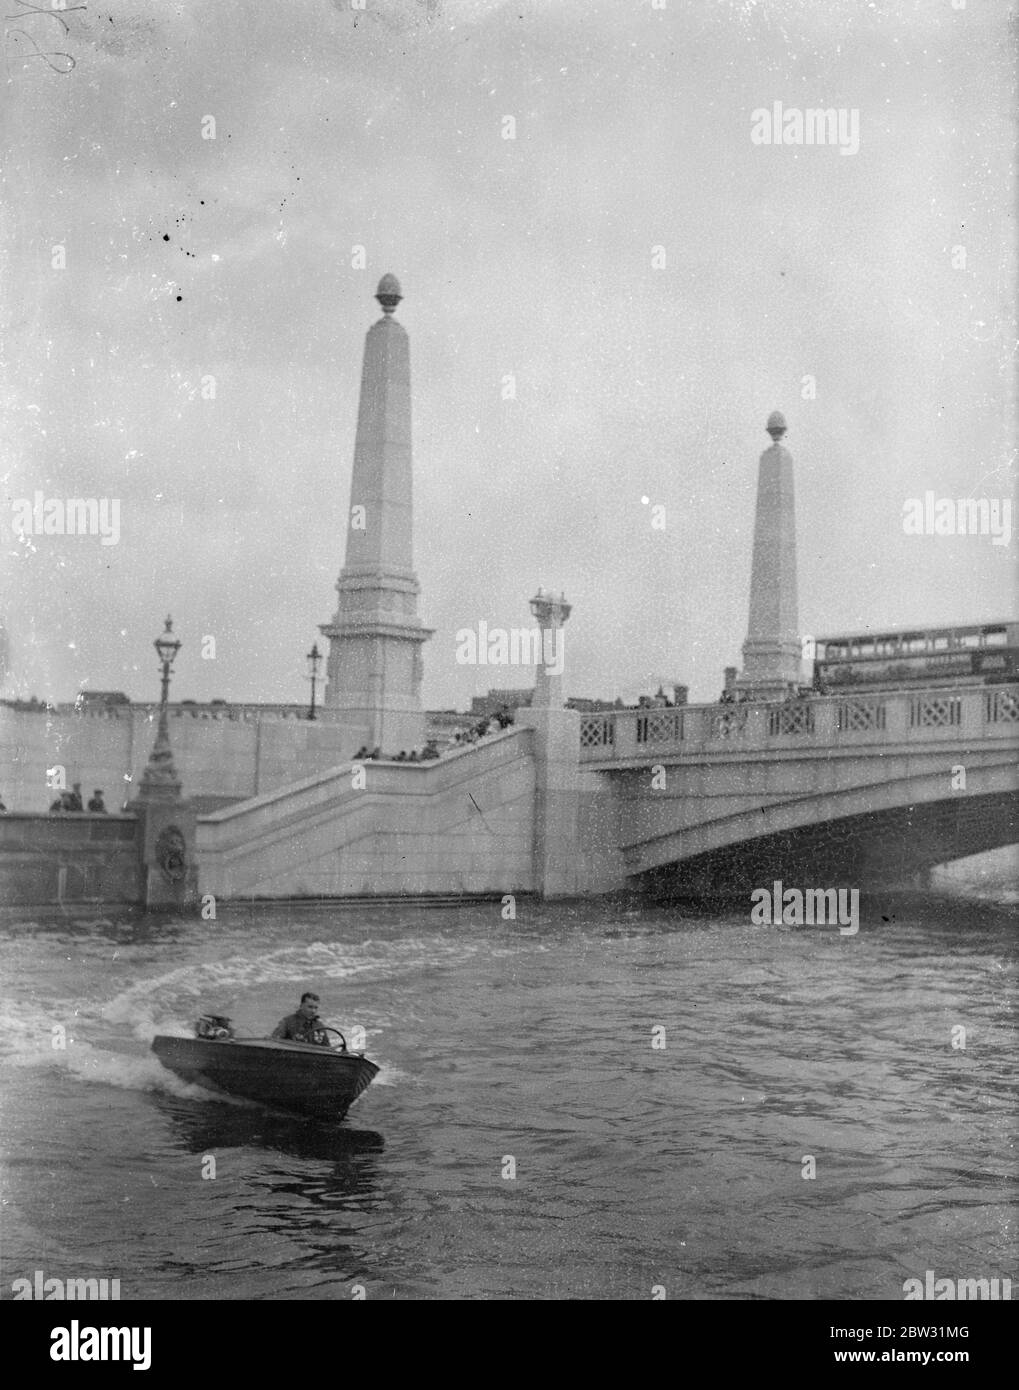 By speed boat to Antwerp . Mr R C Cole , the 21 year old London outboard motorboat enthusiast , in his outboard motorboat ' Miss Whitstable ' which is 13 feet long and has a 3 1/2 h.p engine , os attemptinga lone trip to Antwerp . He recently successfully completed completed the 550 miles journey from Westminster Bridge to Paris . Mr R C Cole at the wheel of his motorboat speeding in the Thames before the start of his trip . 4 August 1932 Stock Photo